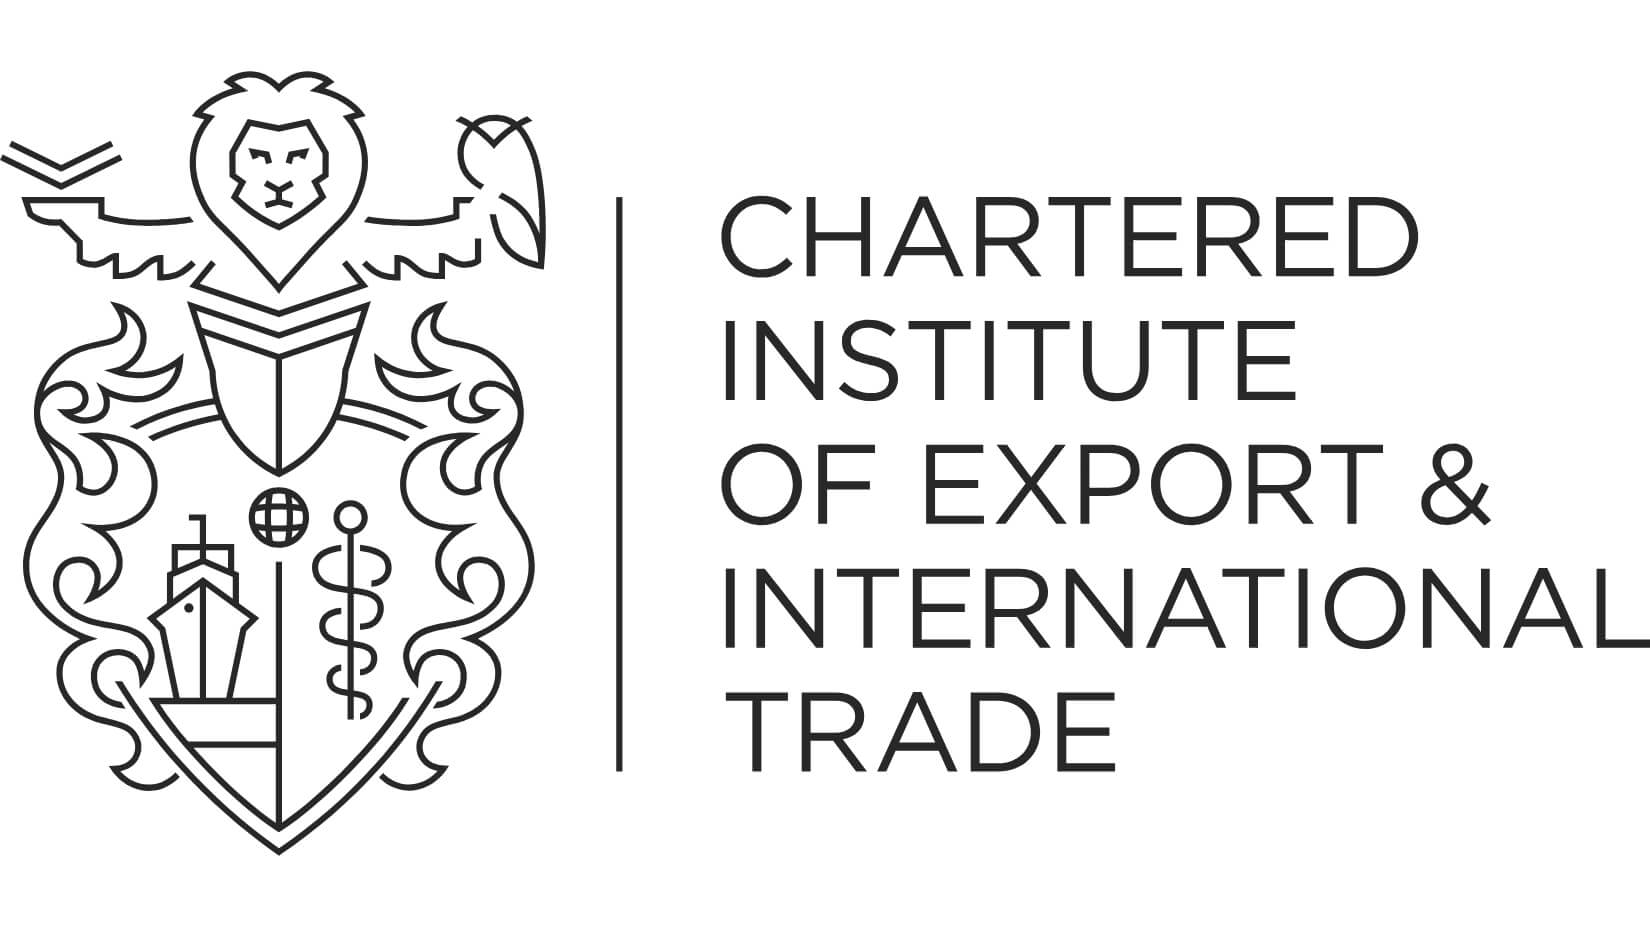 Dynex are business members of the Chartered Institute of Export & International Trade